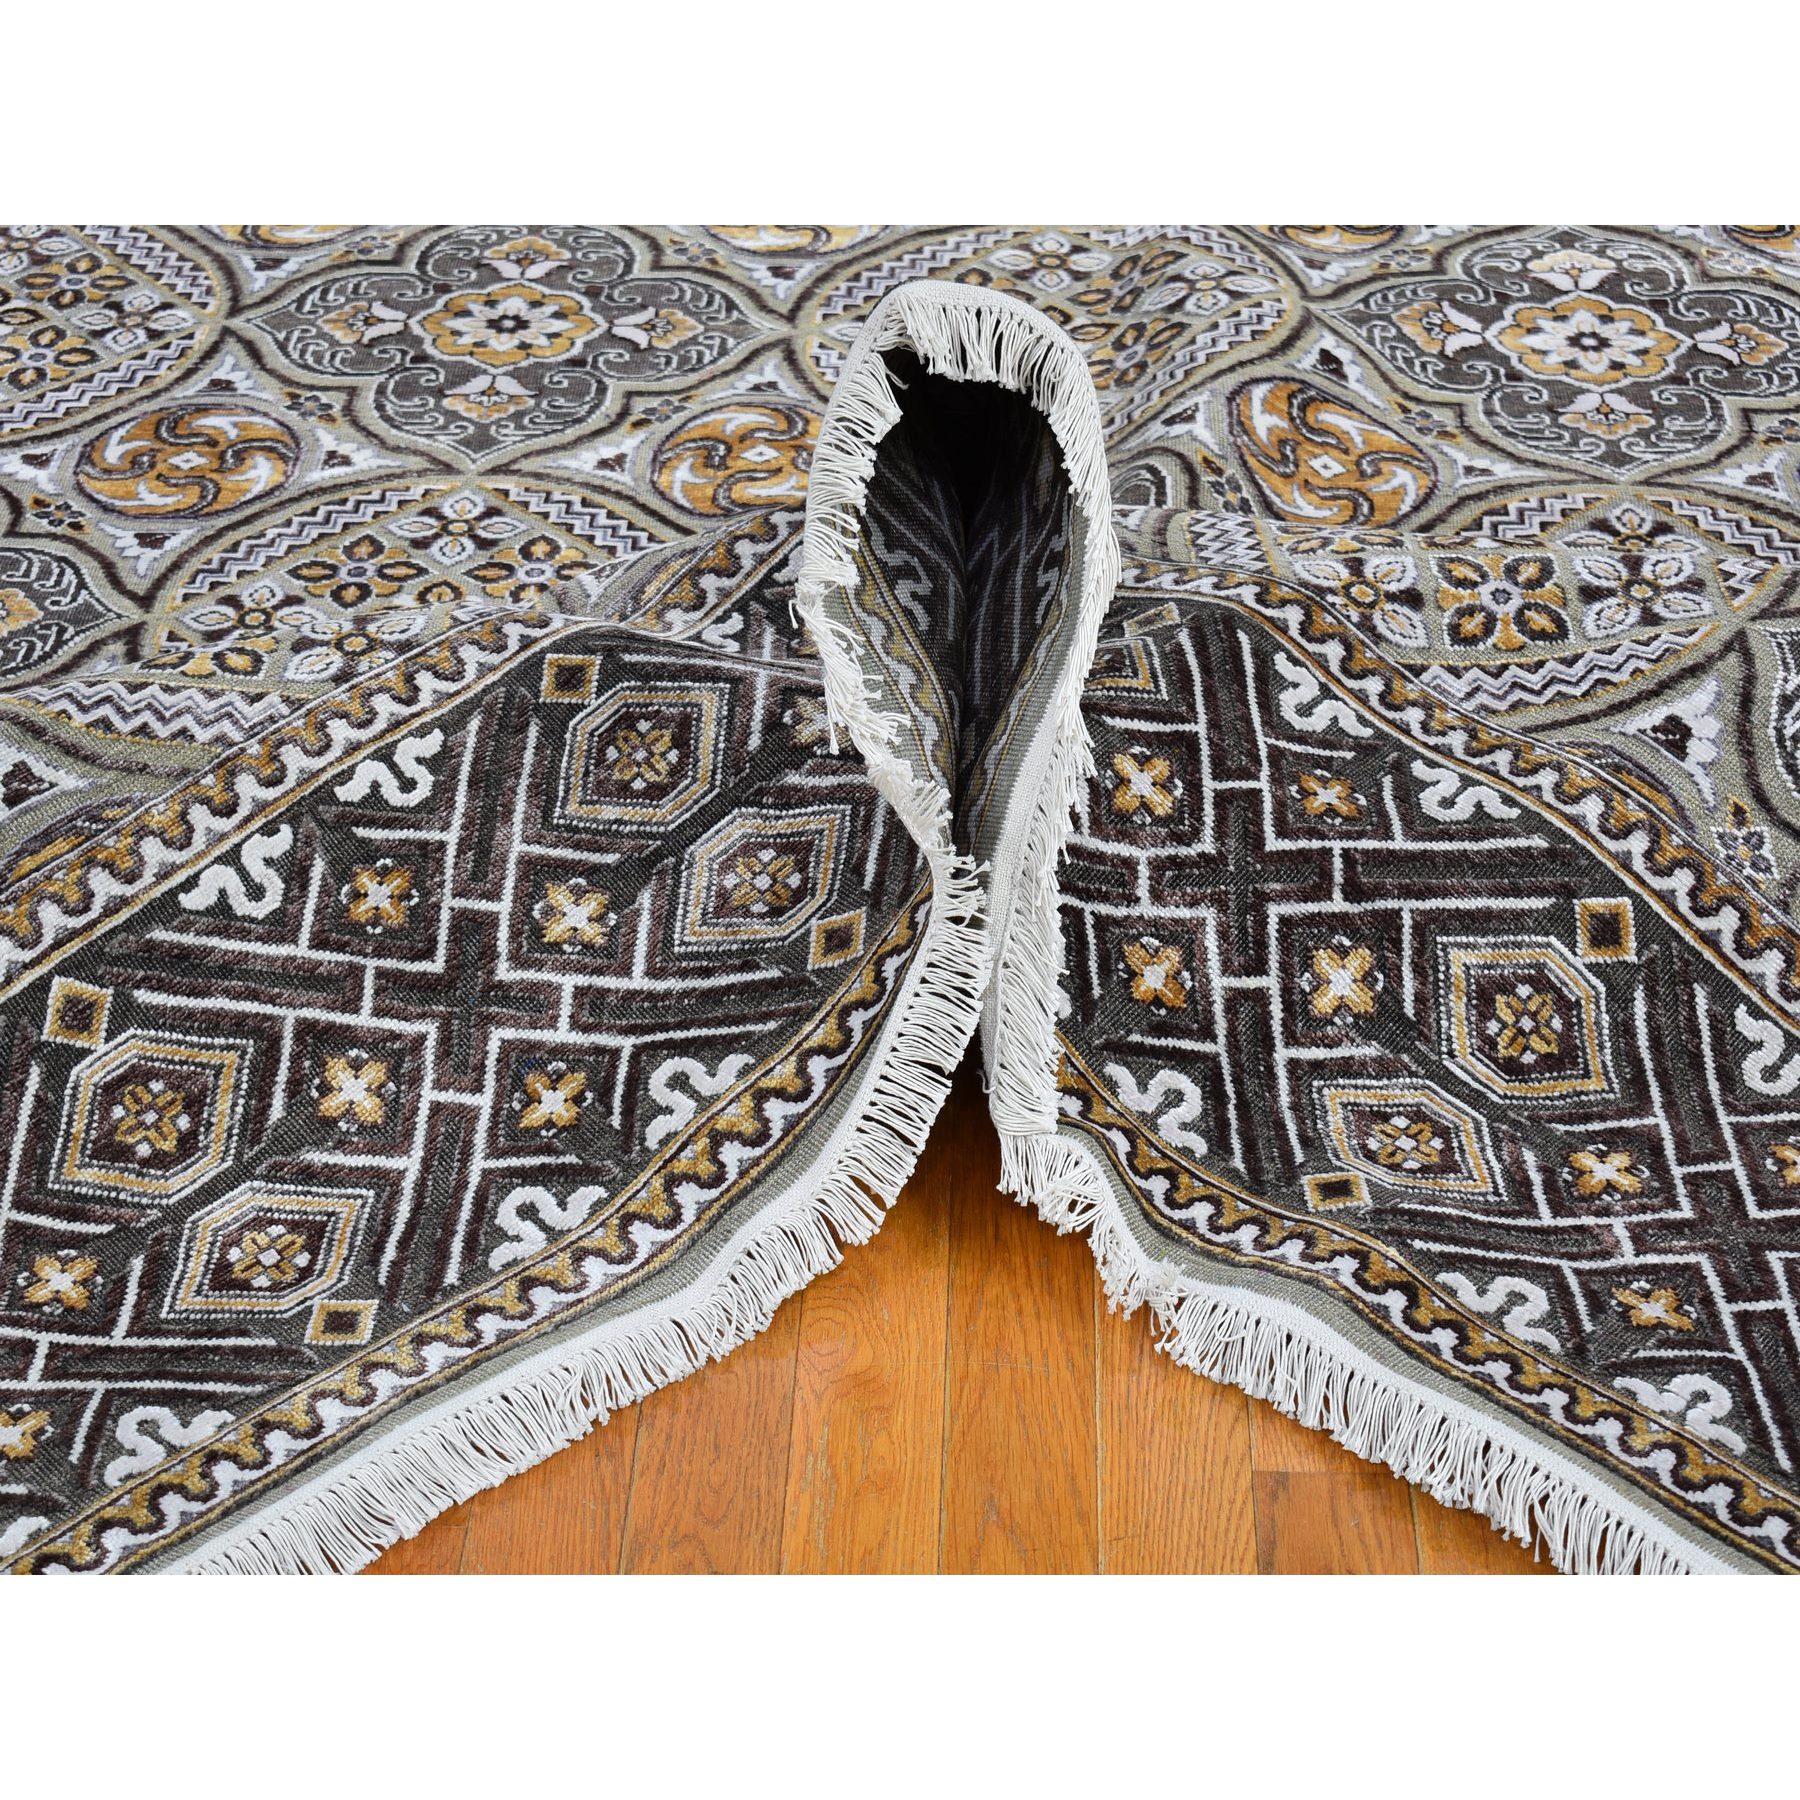 10'x10' Textured Wool and Silk Square Mughal Inspired Medallions Design Hand Woven Brown and Gray Oriental Rug 